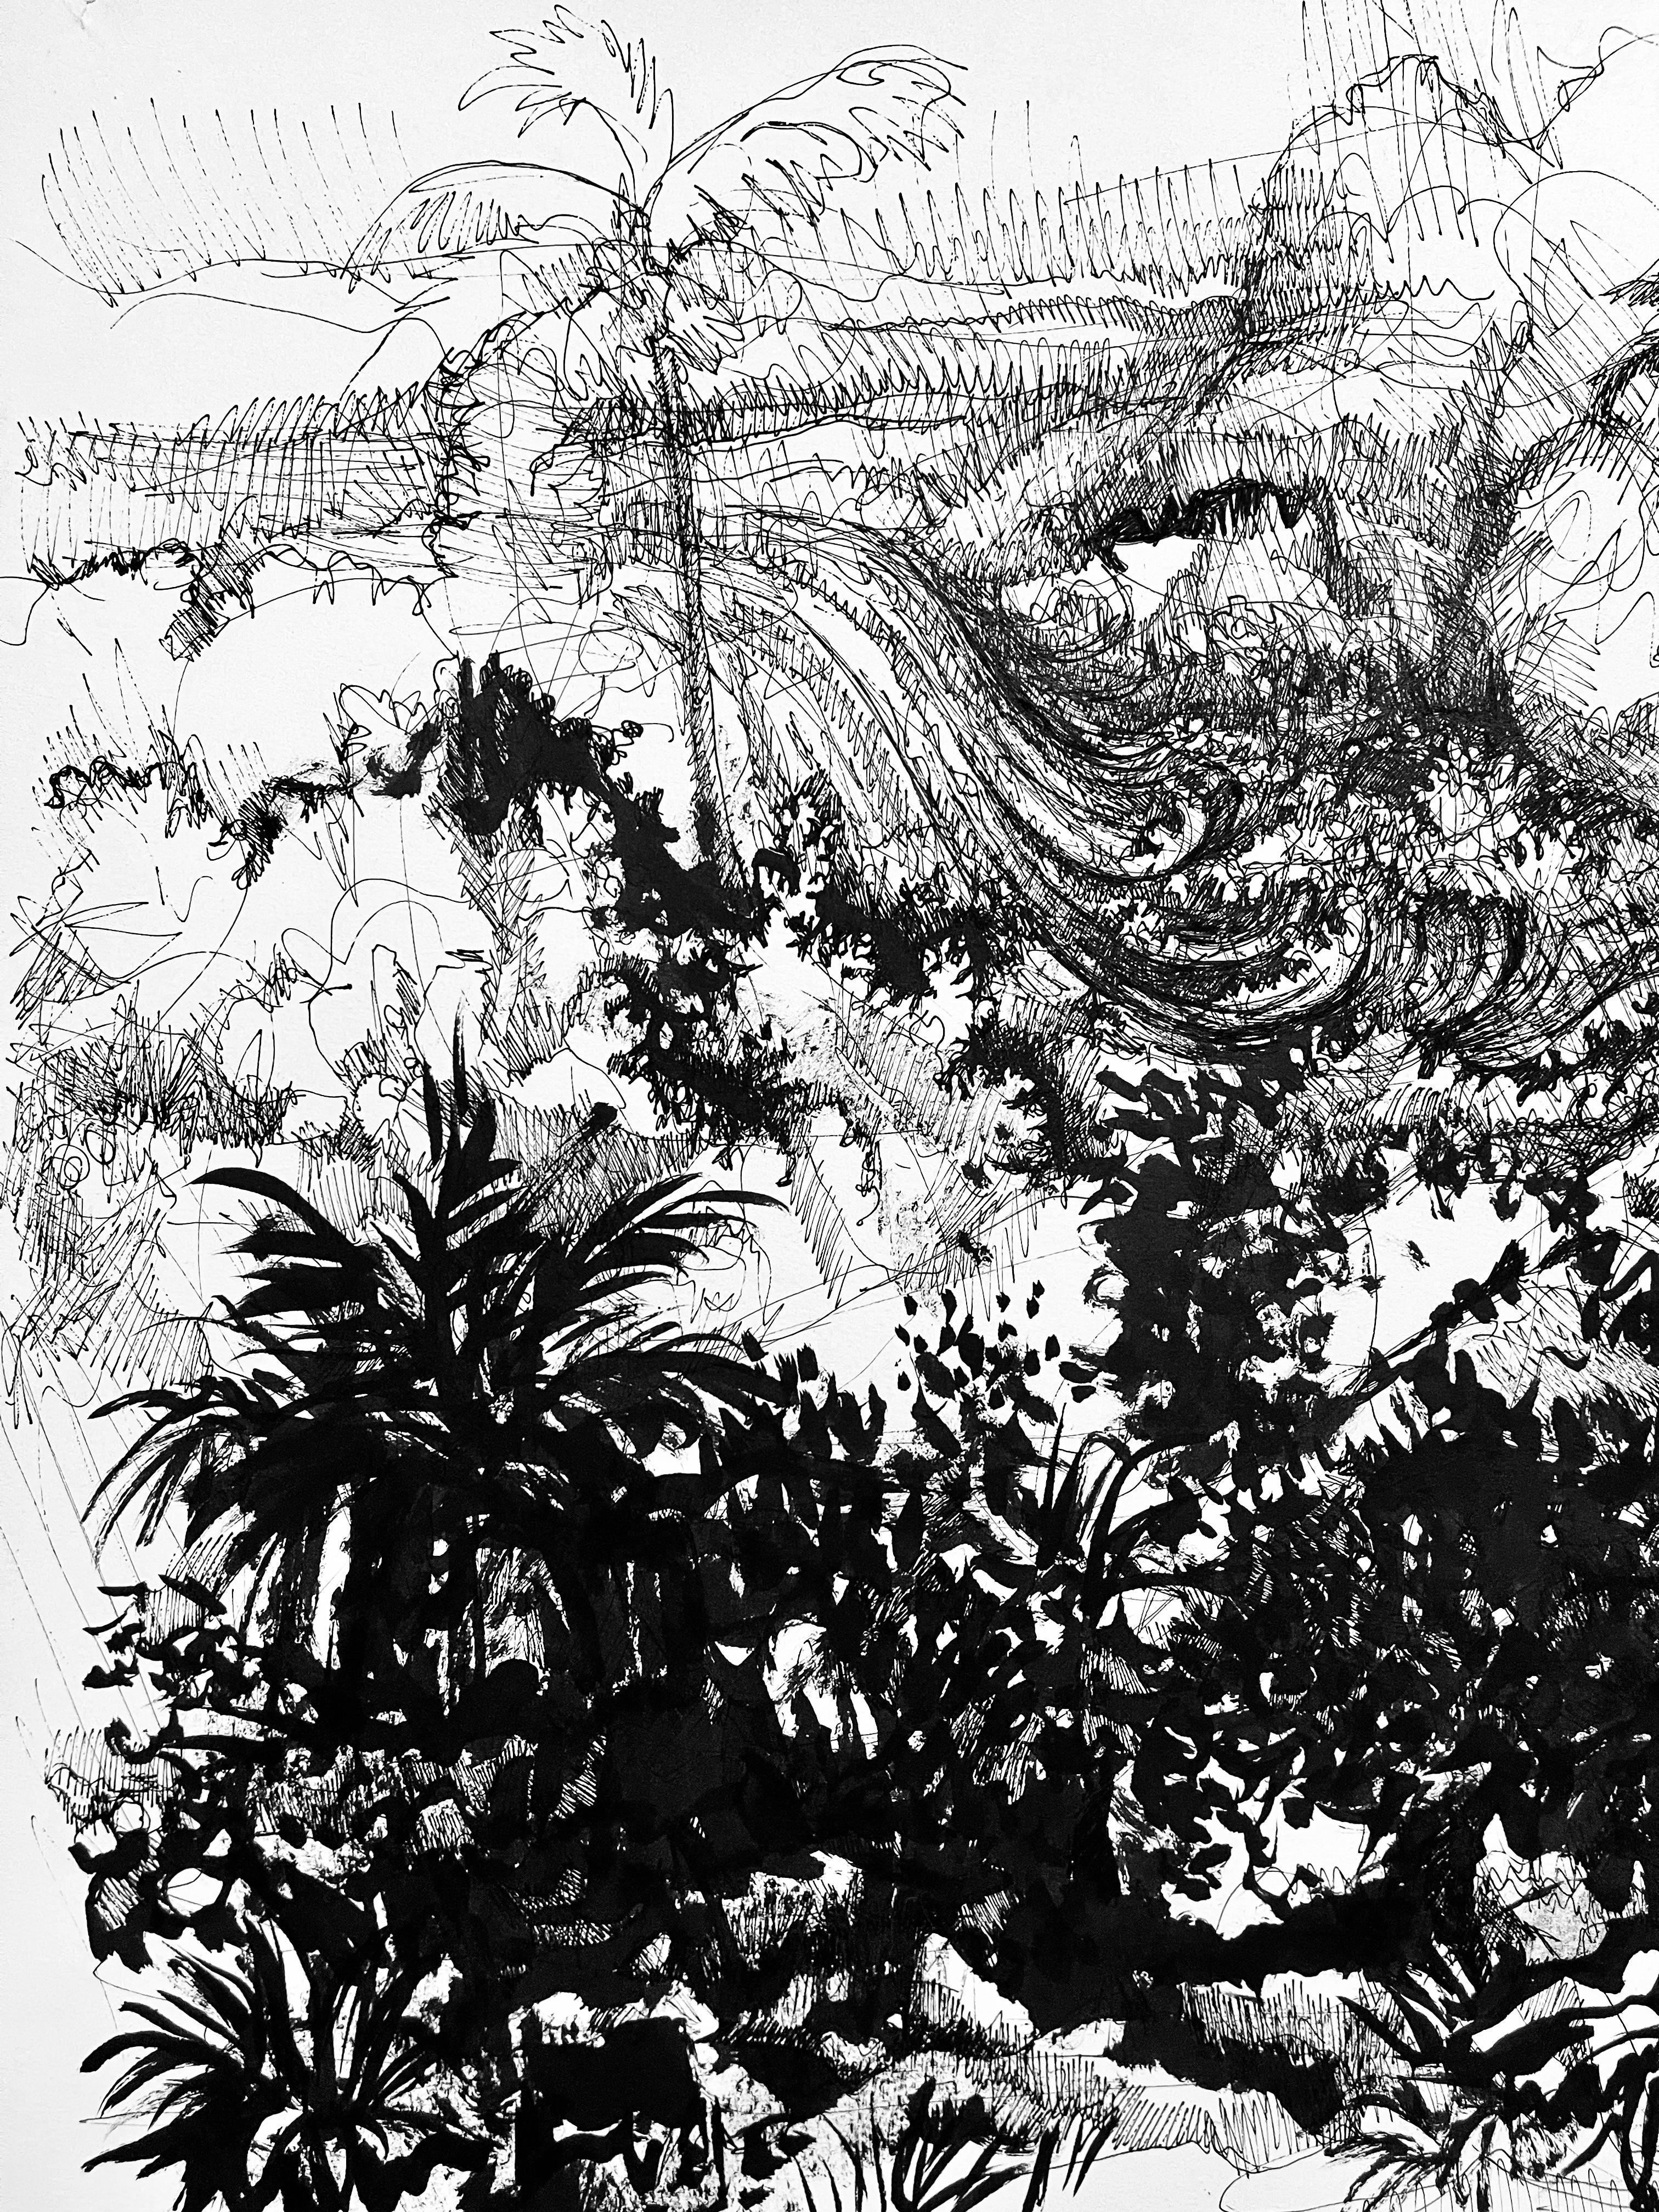 (Apocalyptic Tropical Landscape) Untitled - Art by Ian Hornak